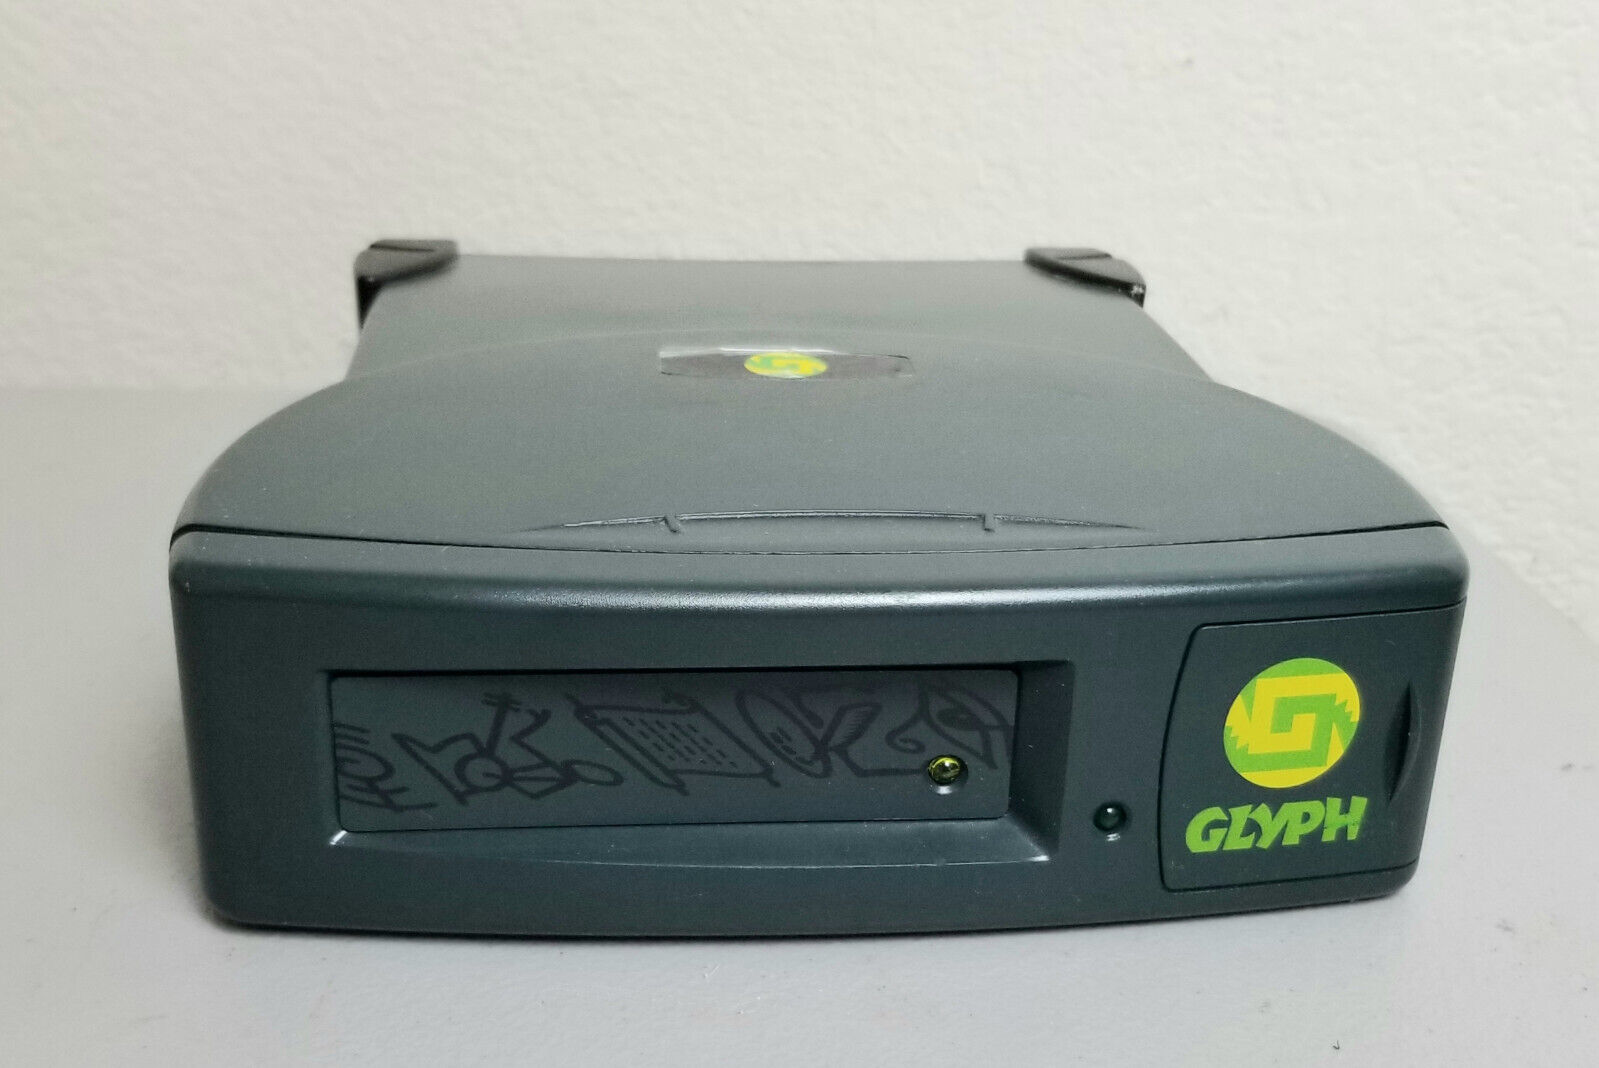 Glyph T41F10 External SCSI Hard Drive Chassis/Case